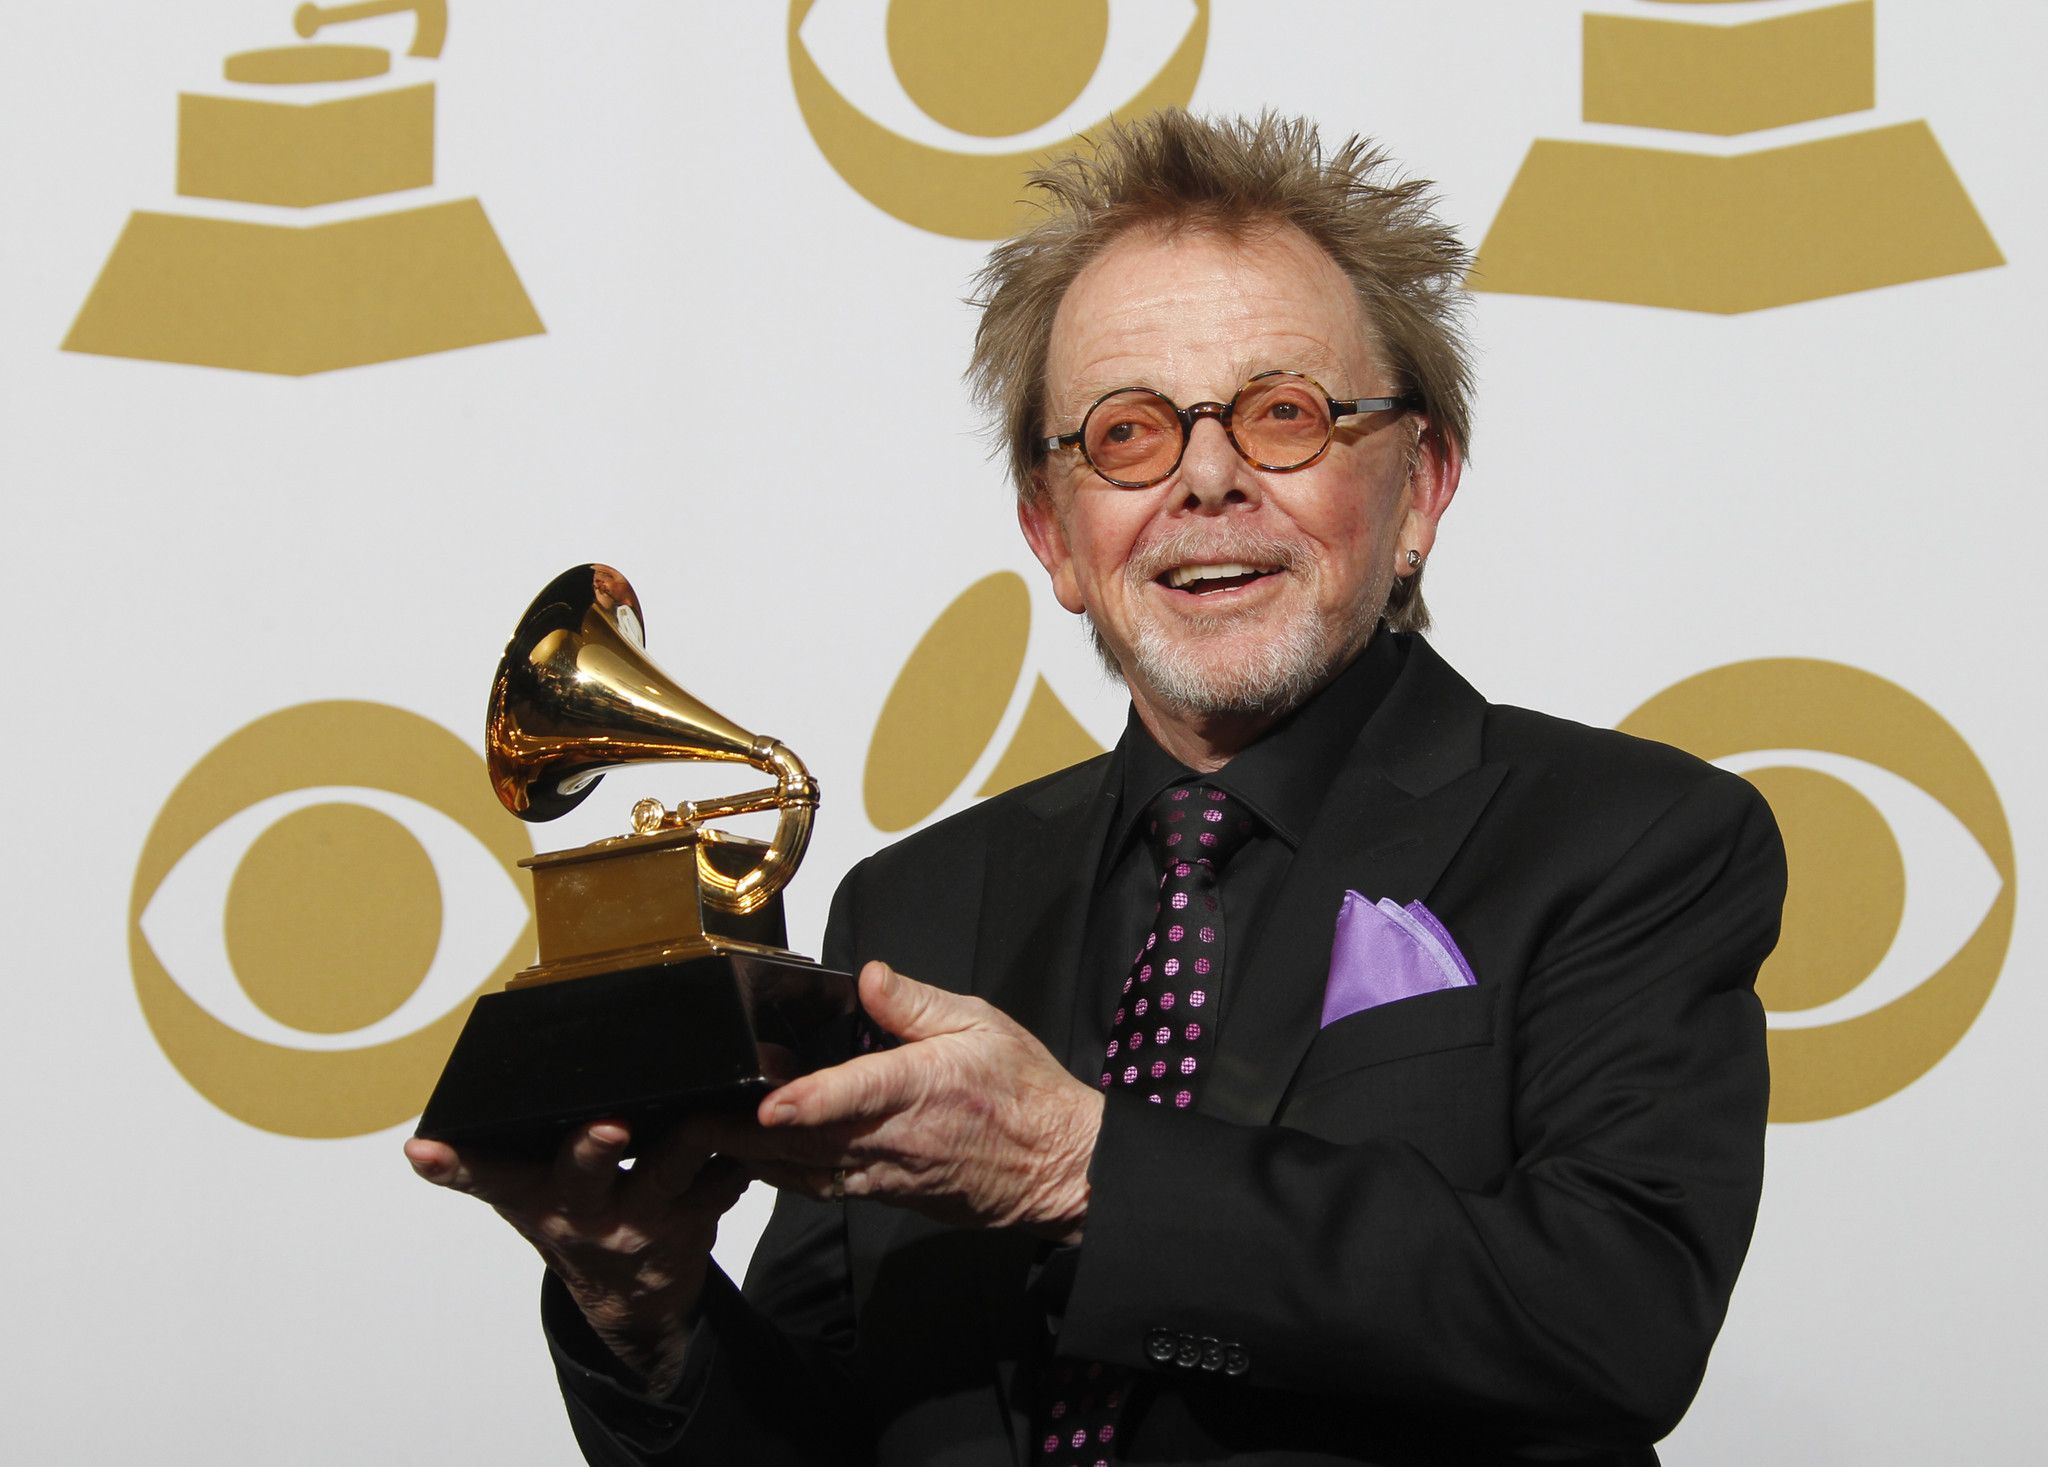 How Tall Is Paul Williams, The Songwriter